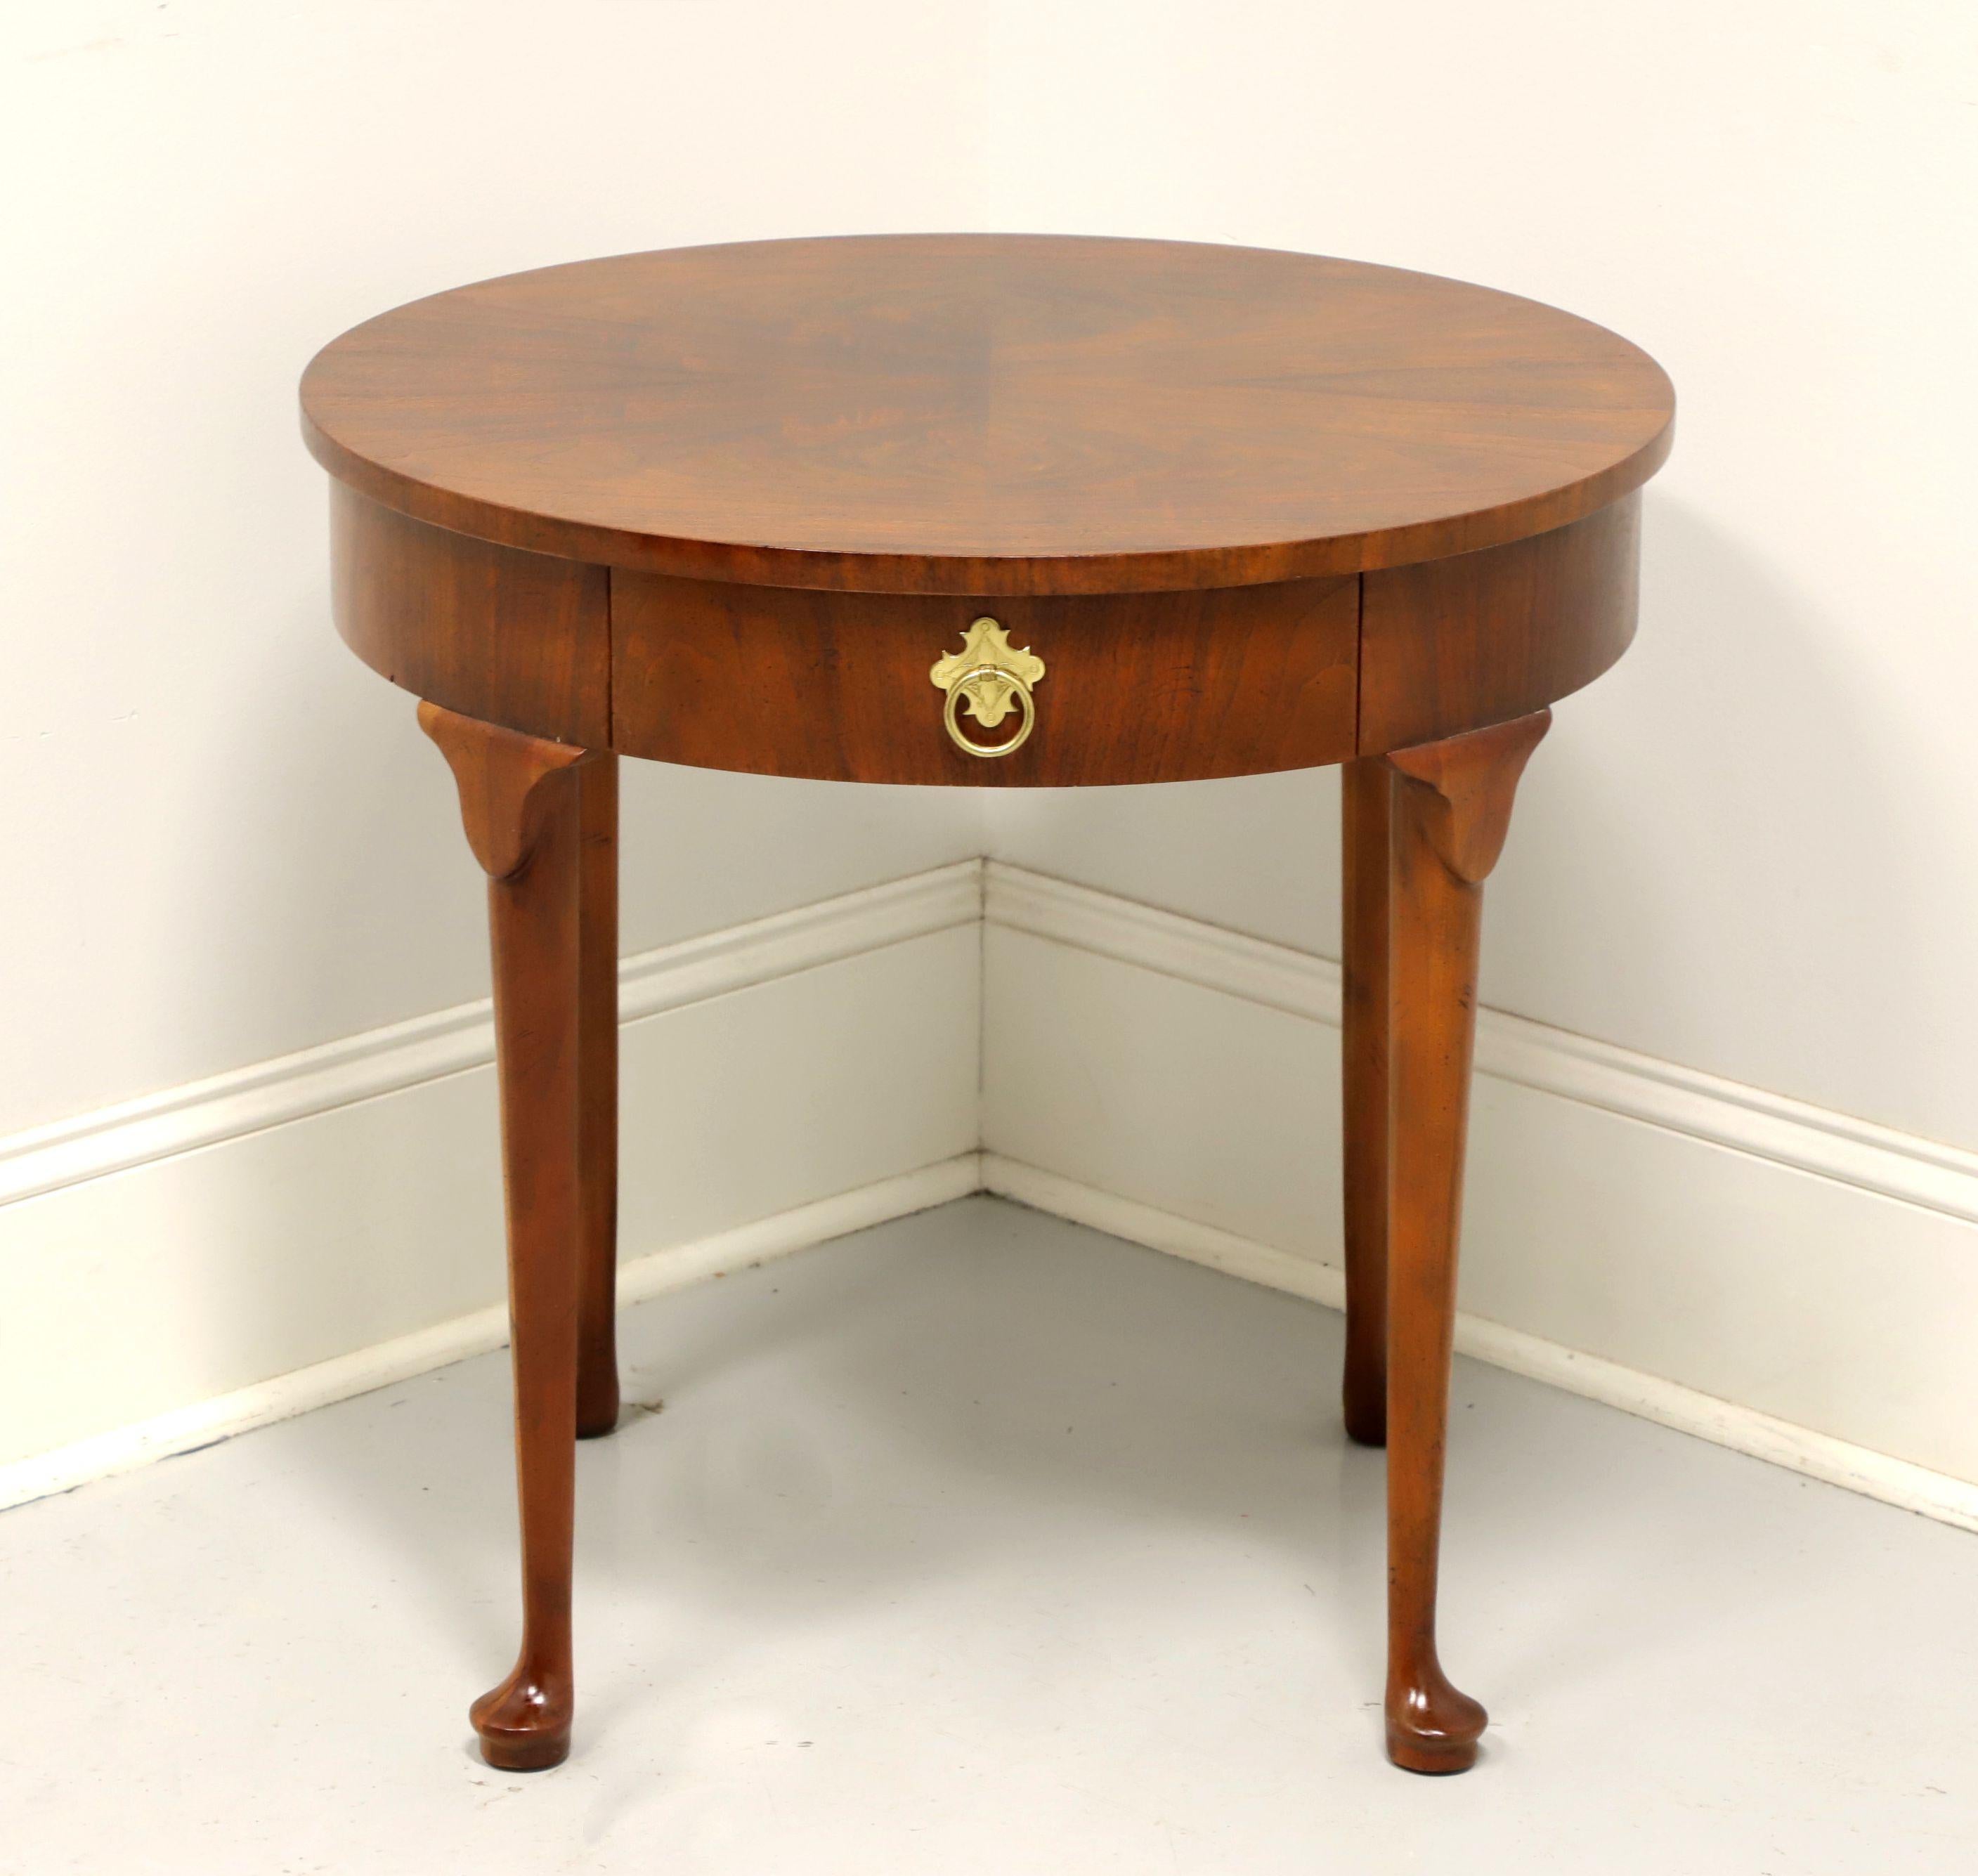 A Georgian style round accent table by Baker Furniture for high end furniture dealer, Colony Furniture of Charlotte, North Carolina, USA, under their private label in the late 20th Century. Walnut with a bookmatched burl walnut top, brass hardware,